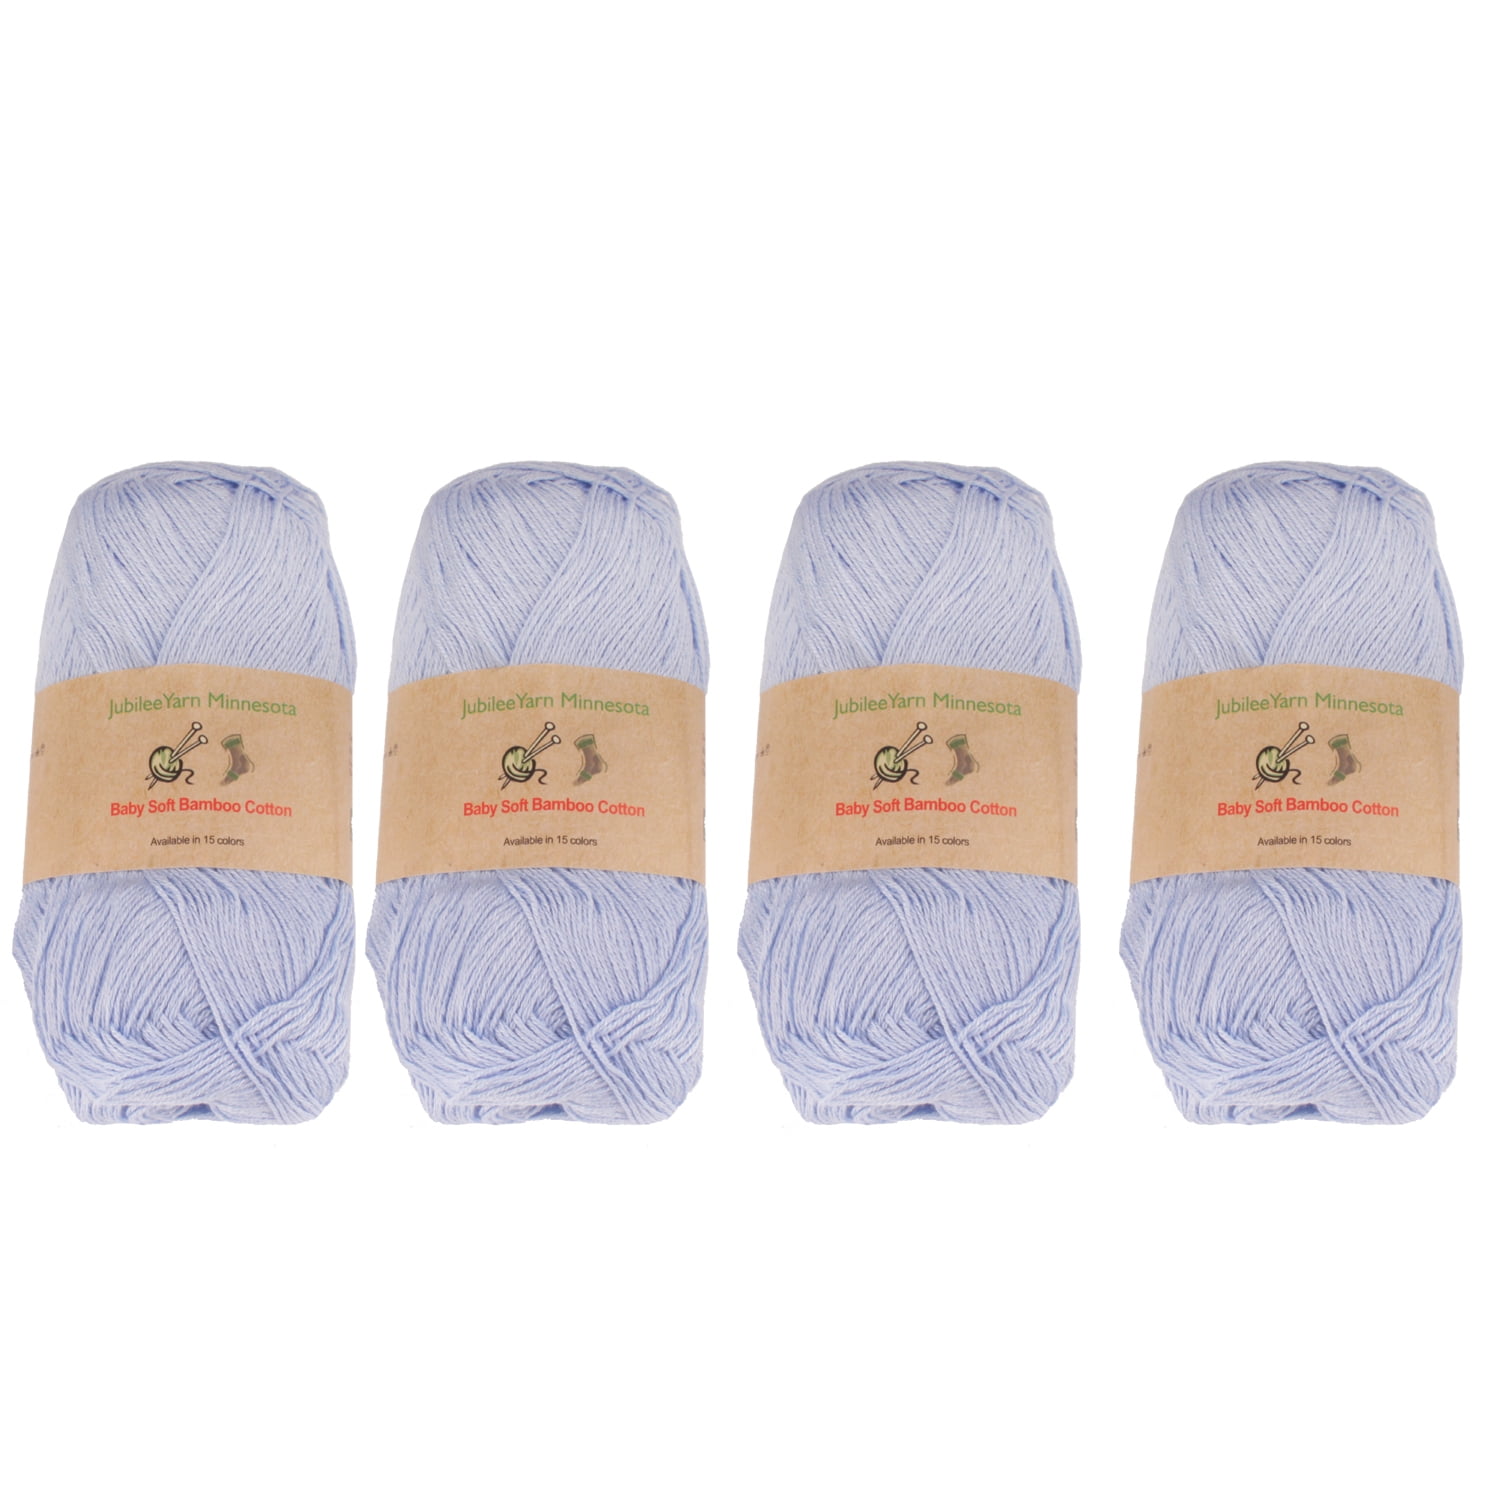 JubileeYarn Baby Soft Bamboo Cotton Yarn - Shades of Neutral Colors - 4  Skeins